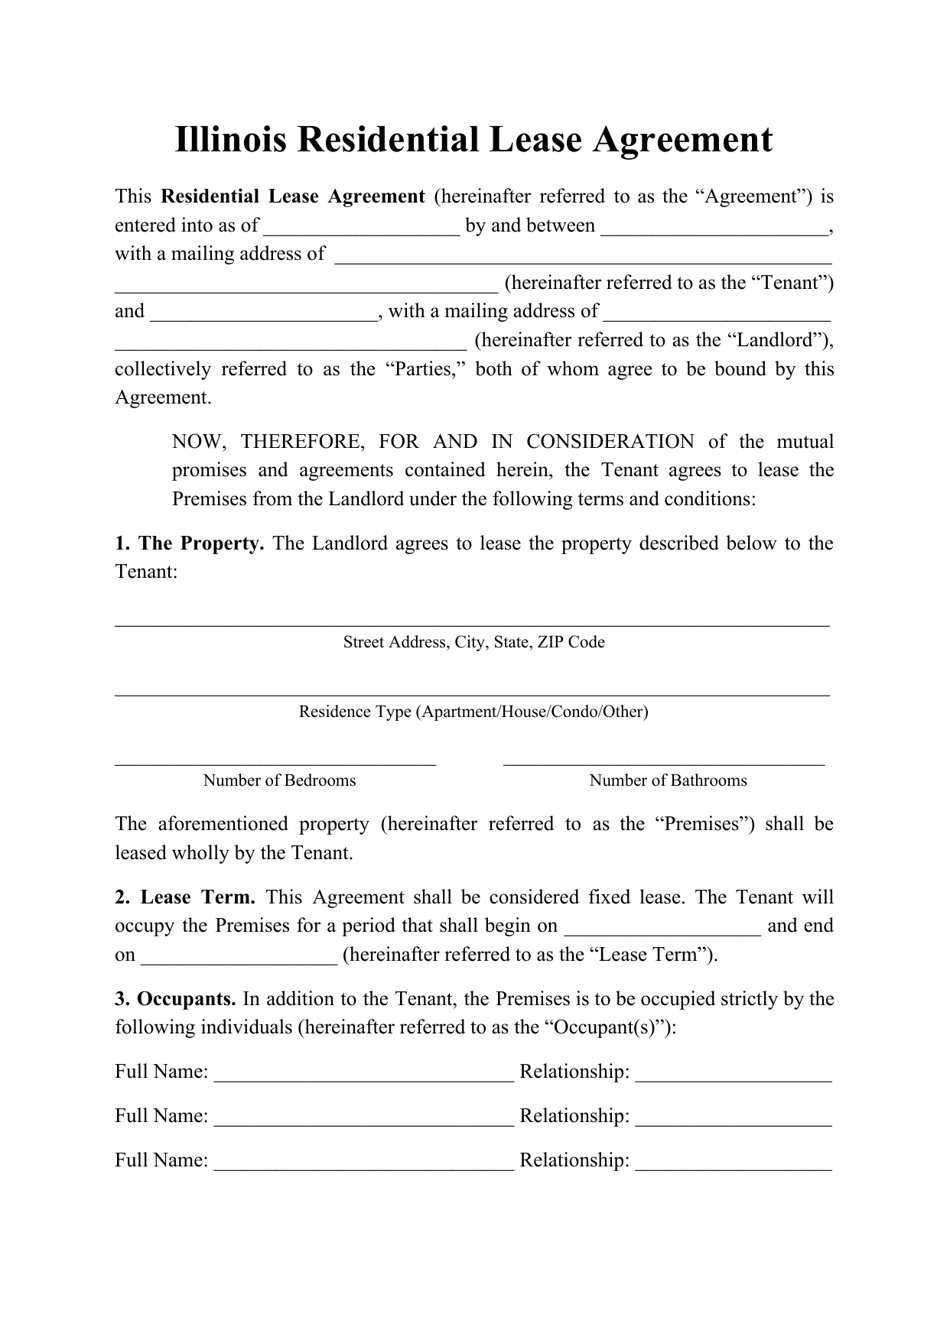 Residential Lease Agreement Template - Illinois, Page 1